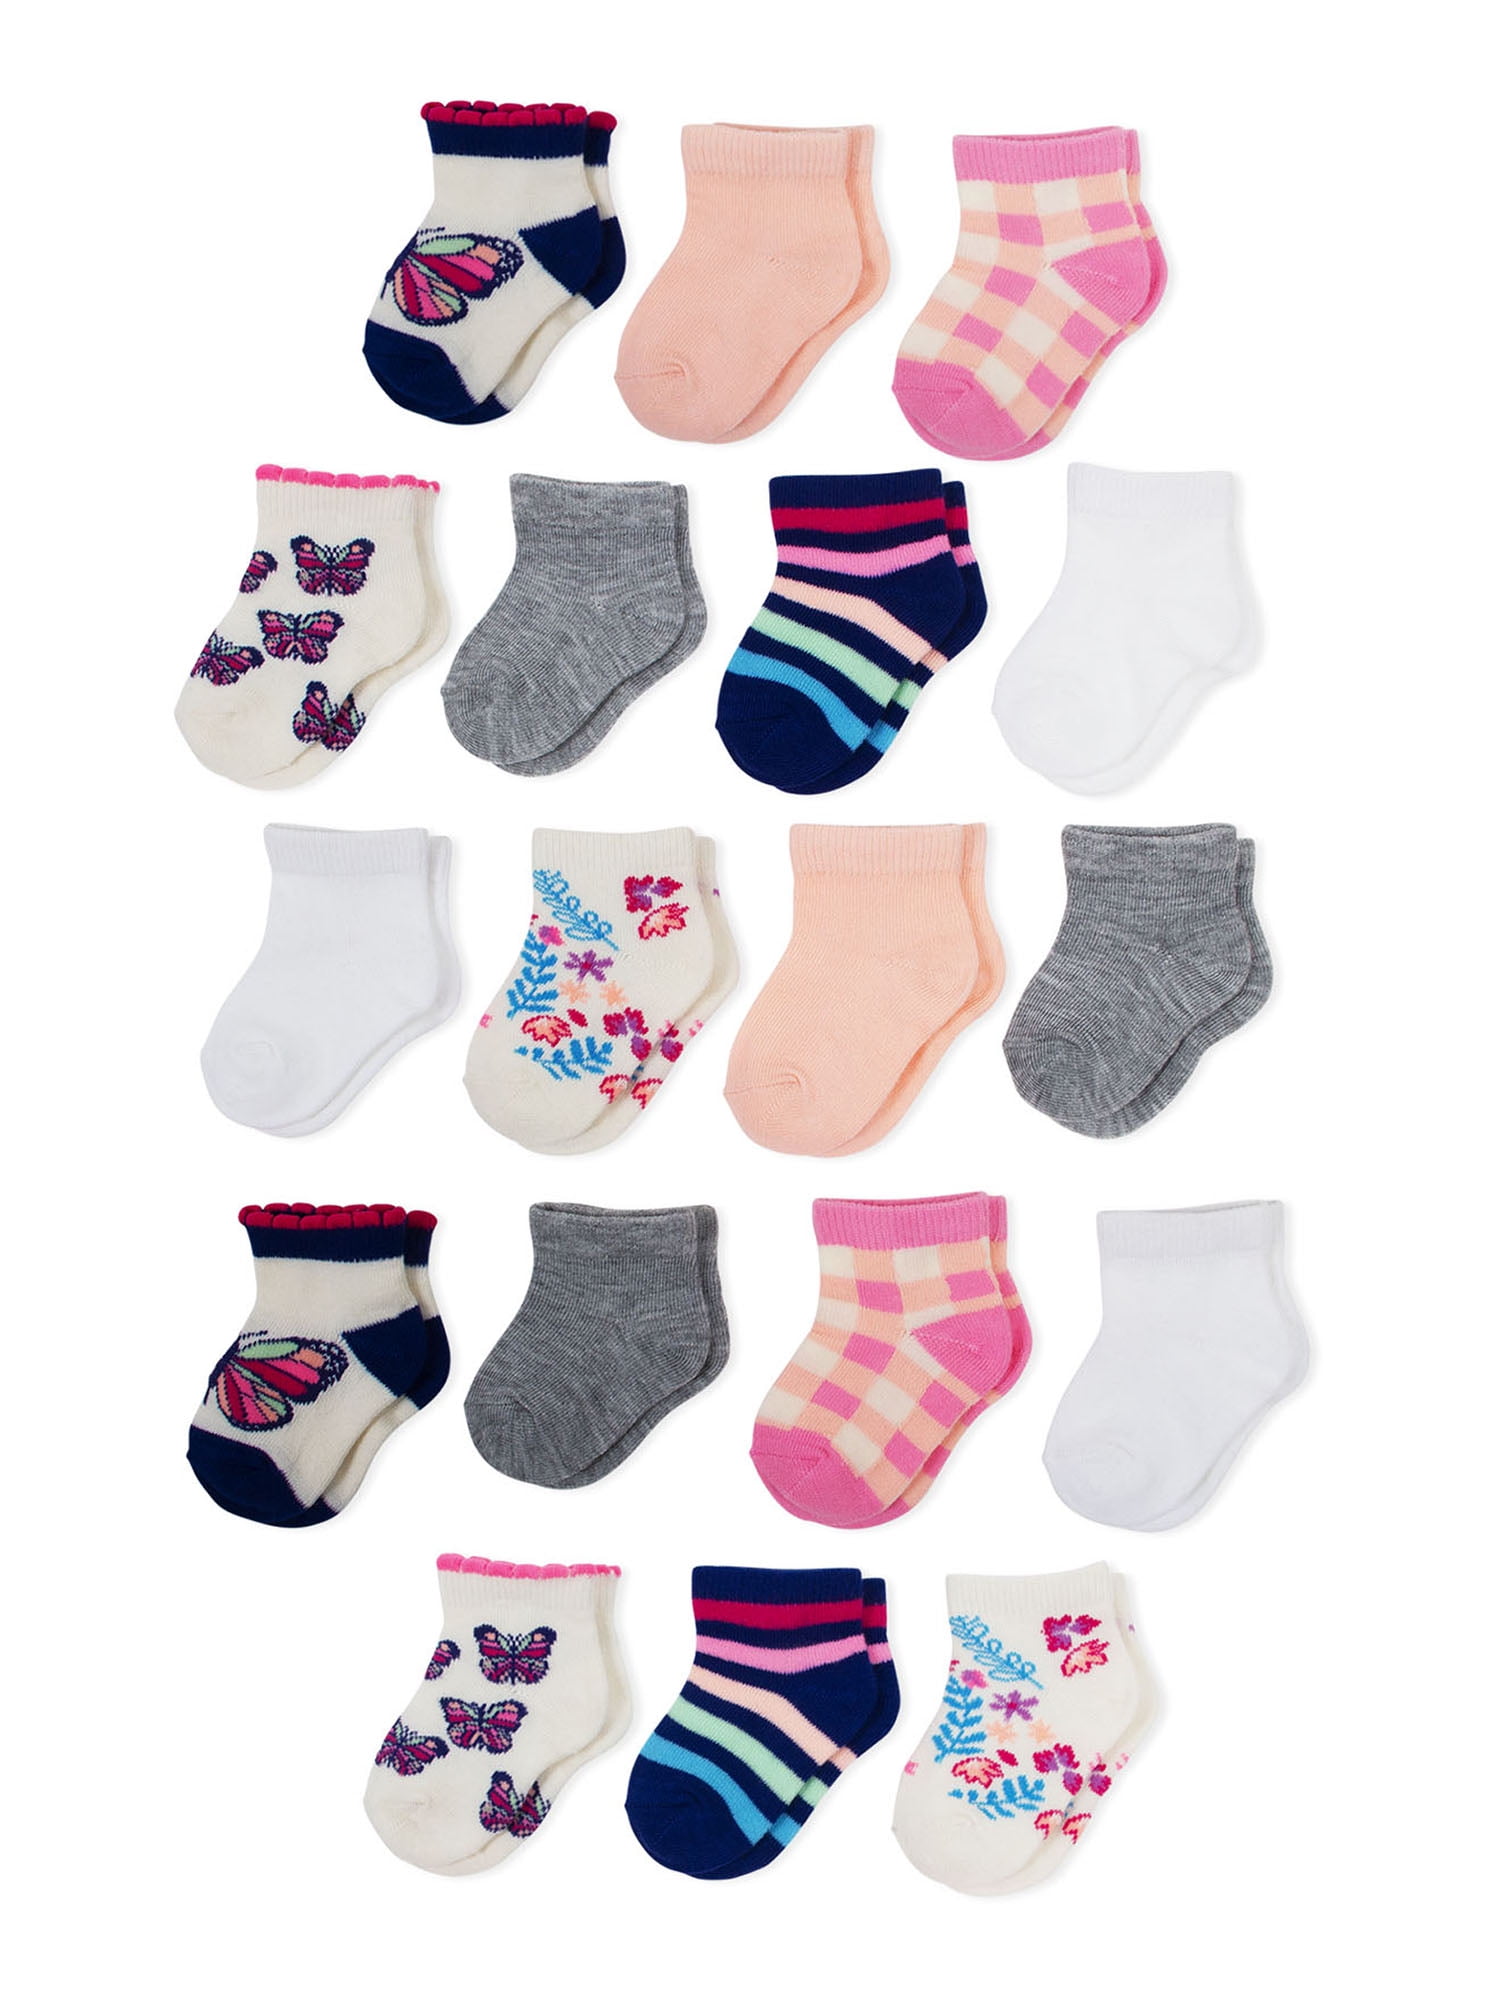 UK MADE. TURN OVER TOP ANKLE BABY PINK SOCKS 6 Pairs PREMATURE DOLL REBORN 